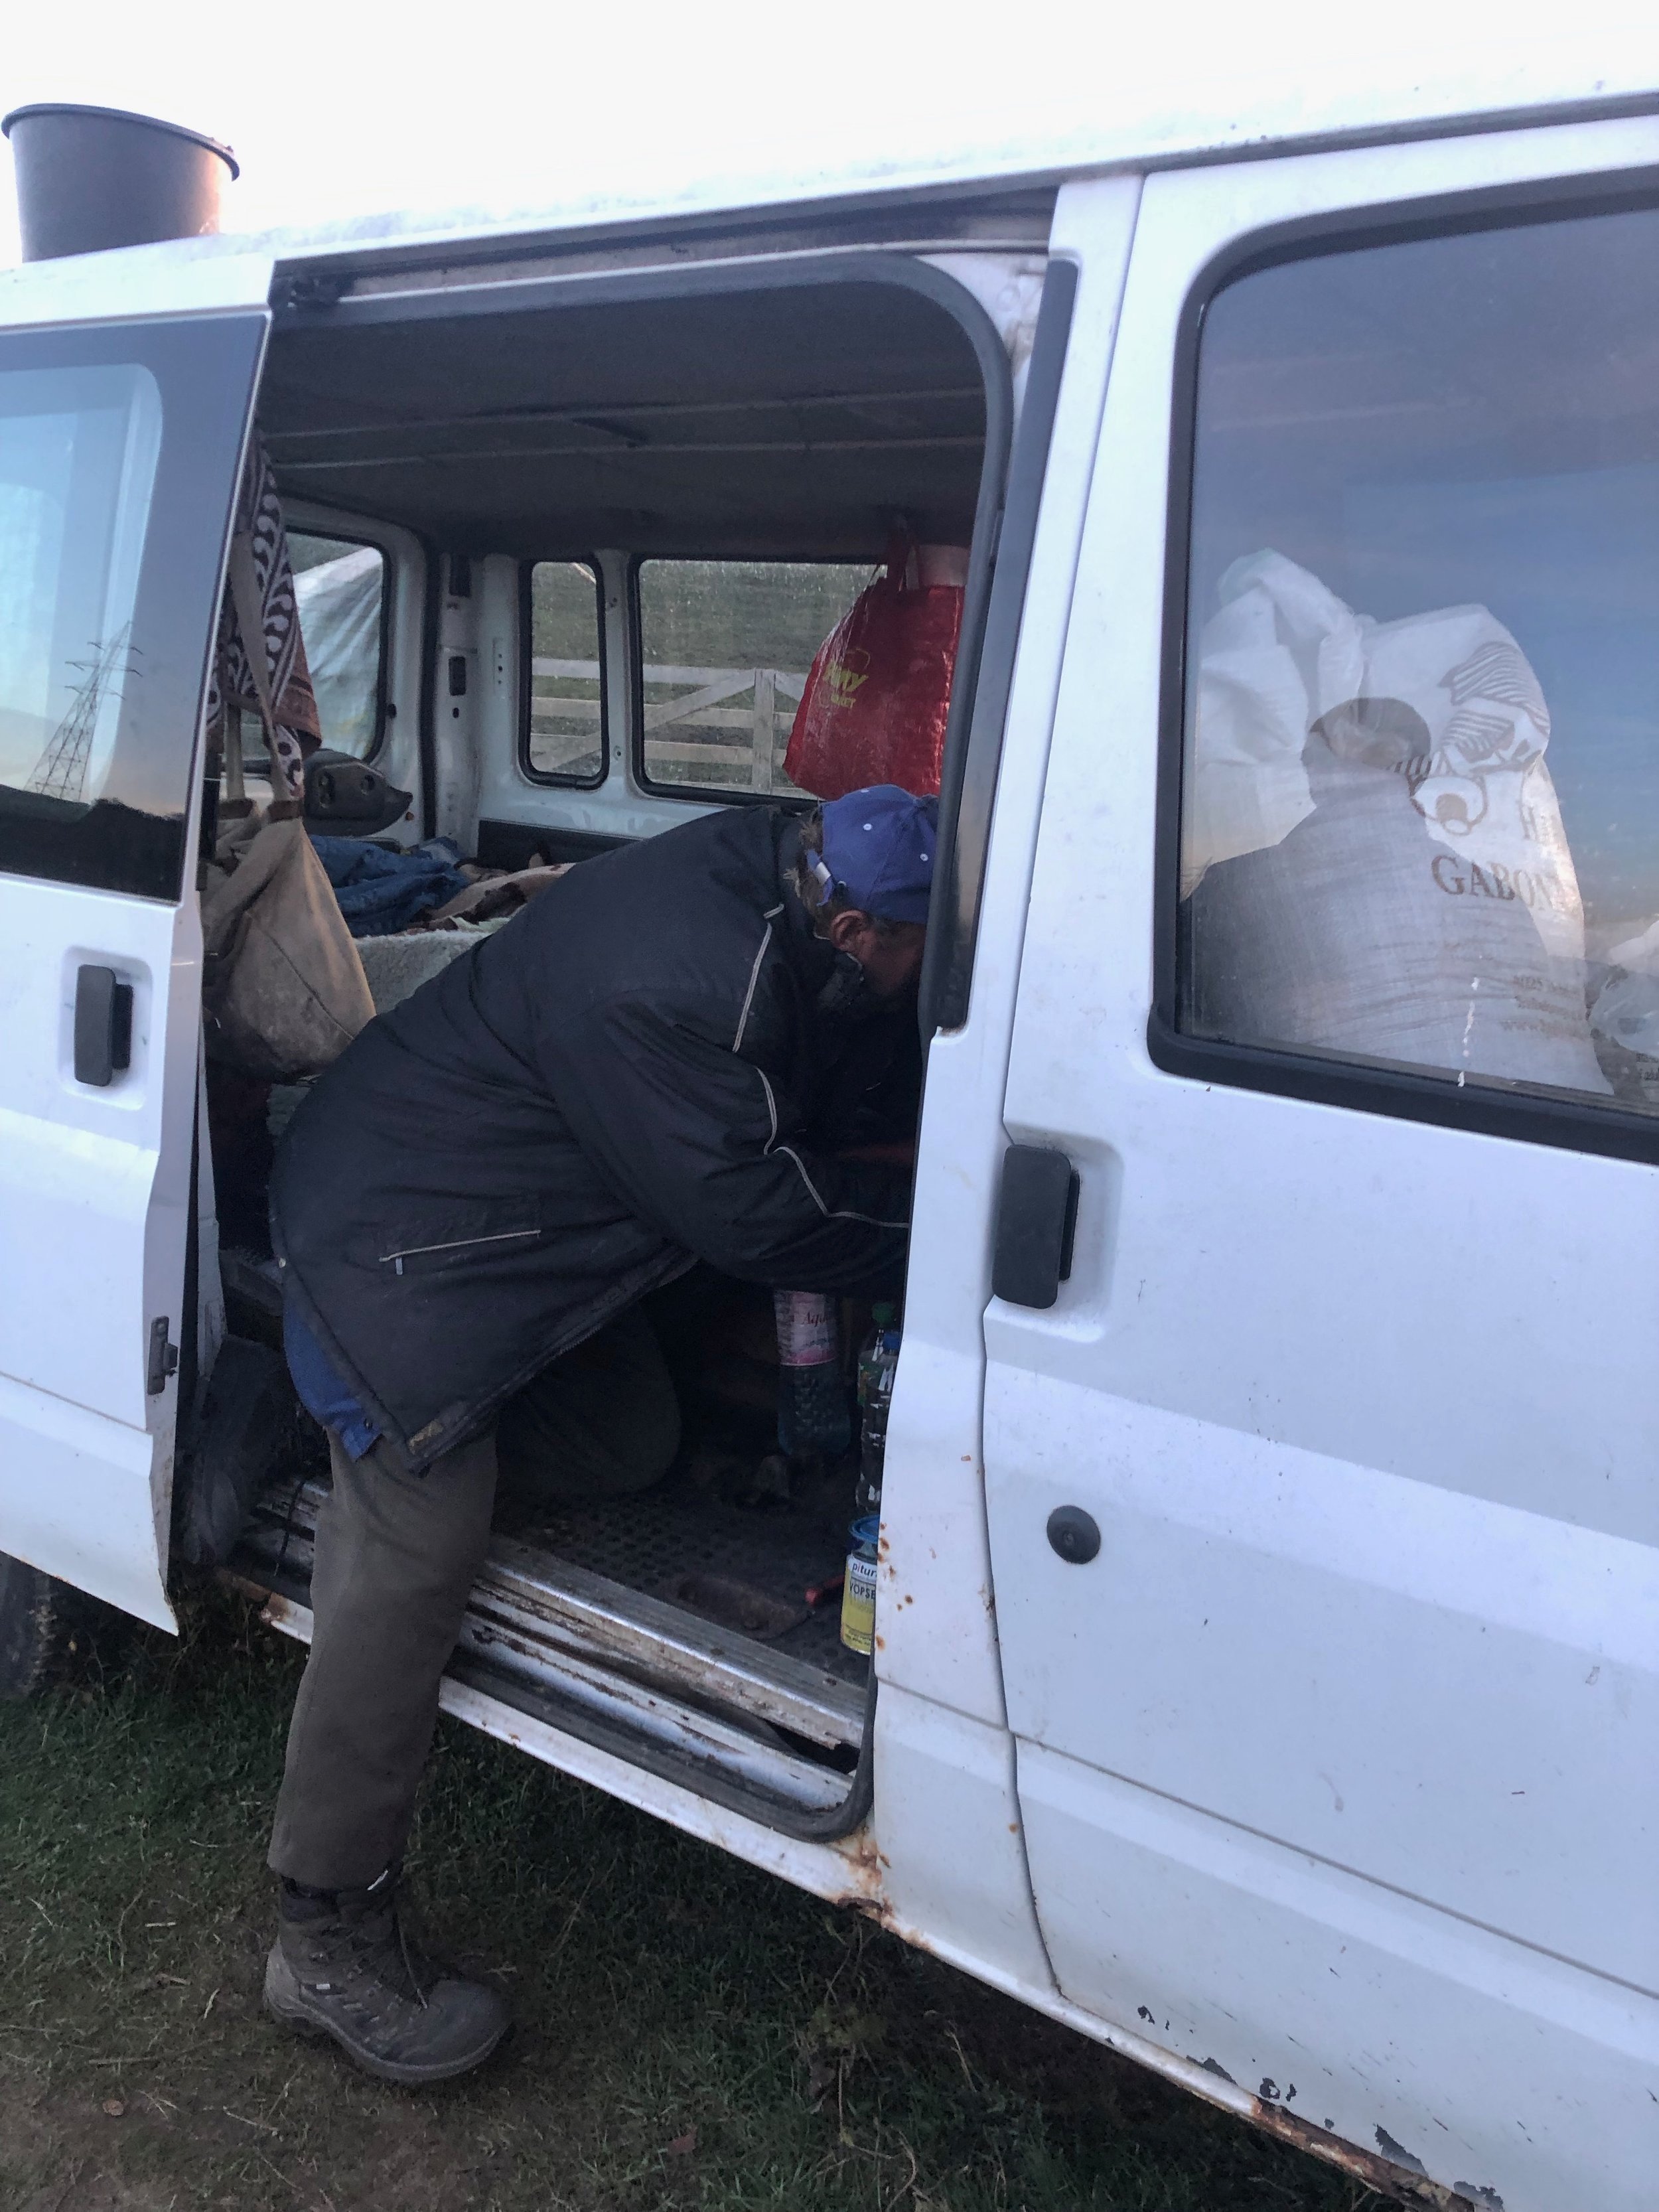 He stays in this van while tending the sheep. 